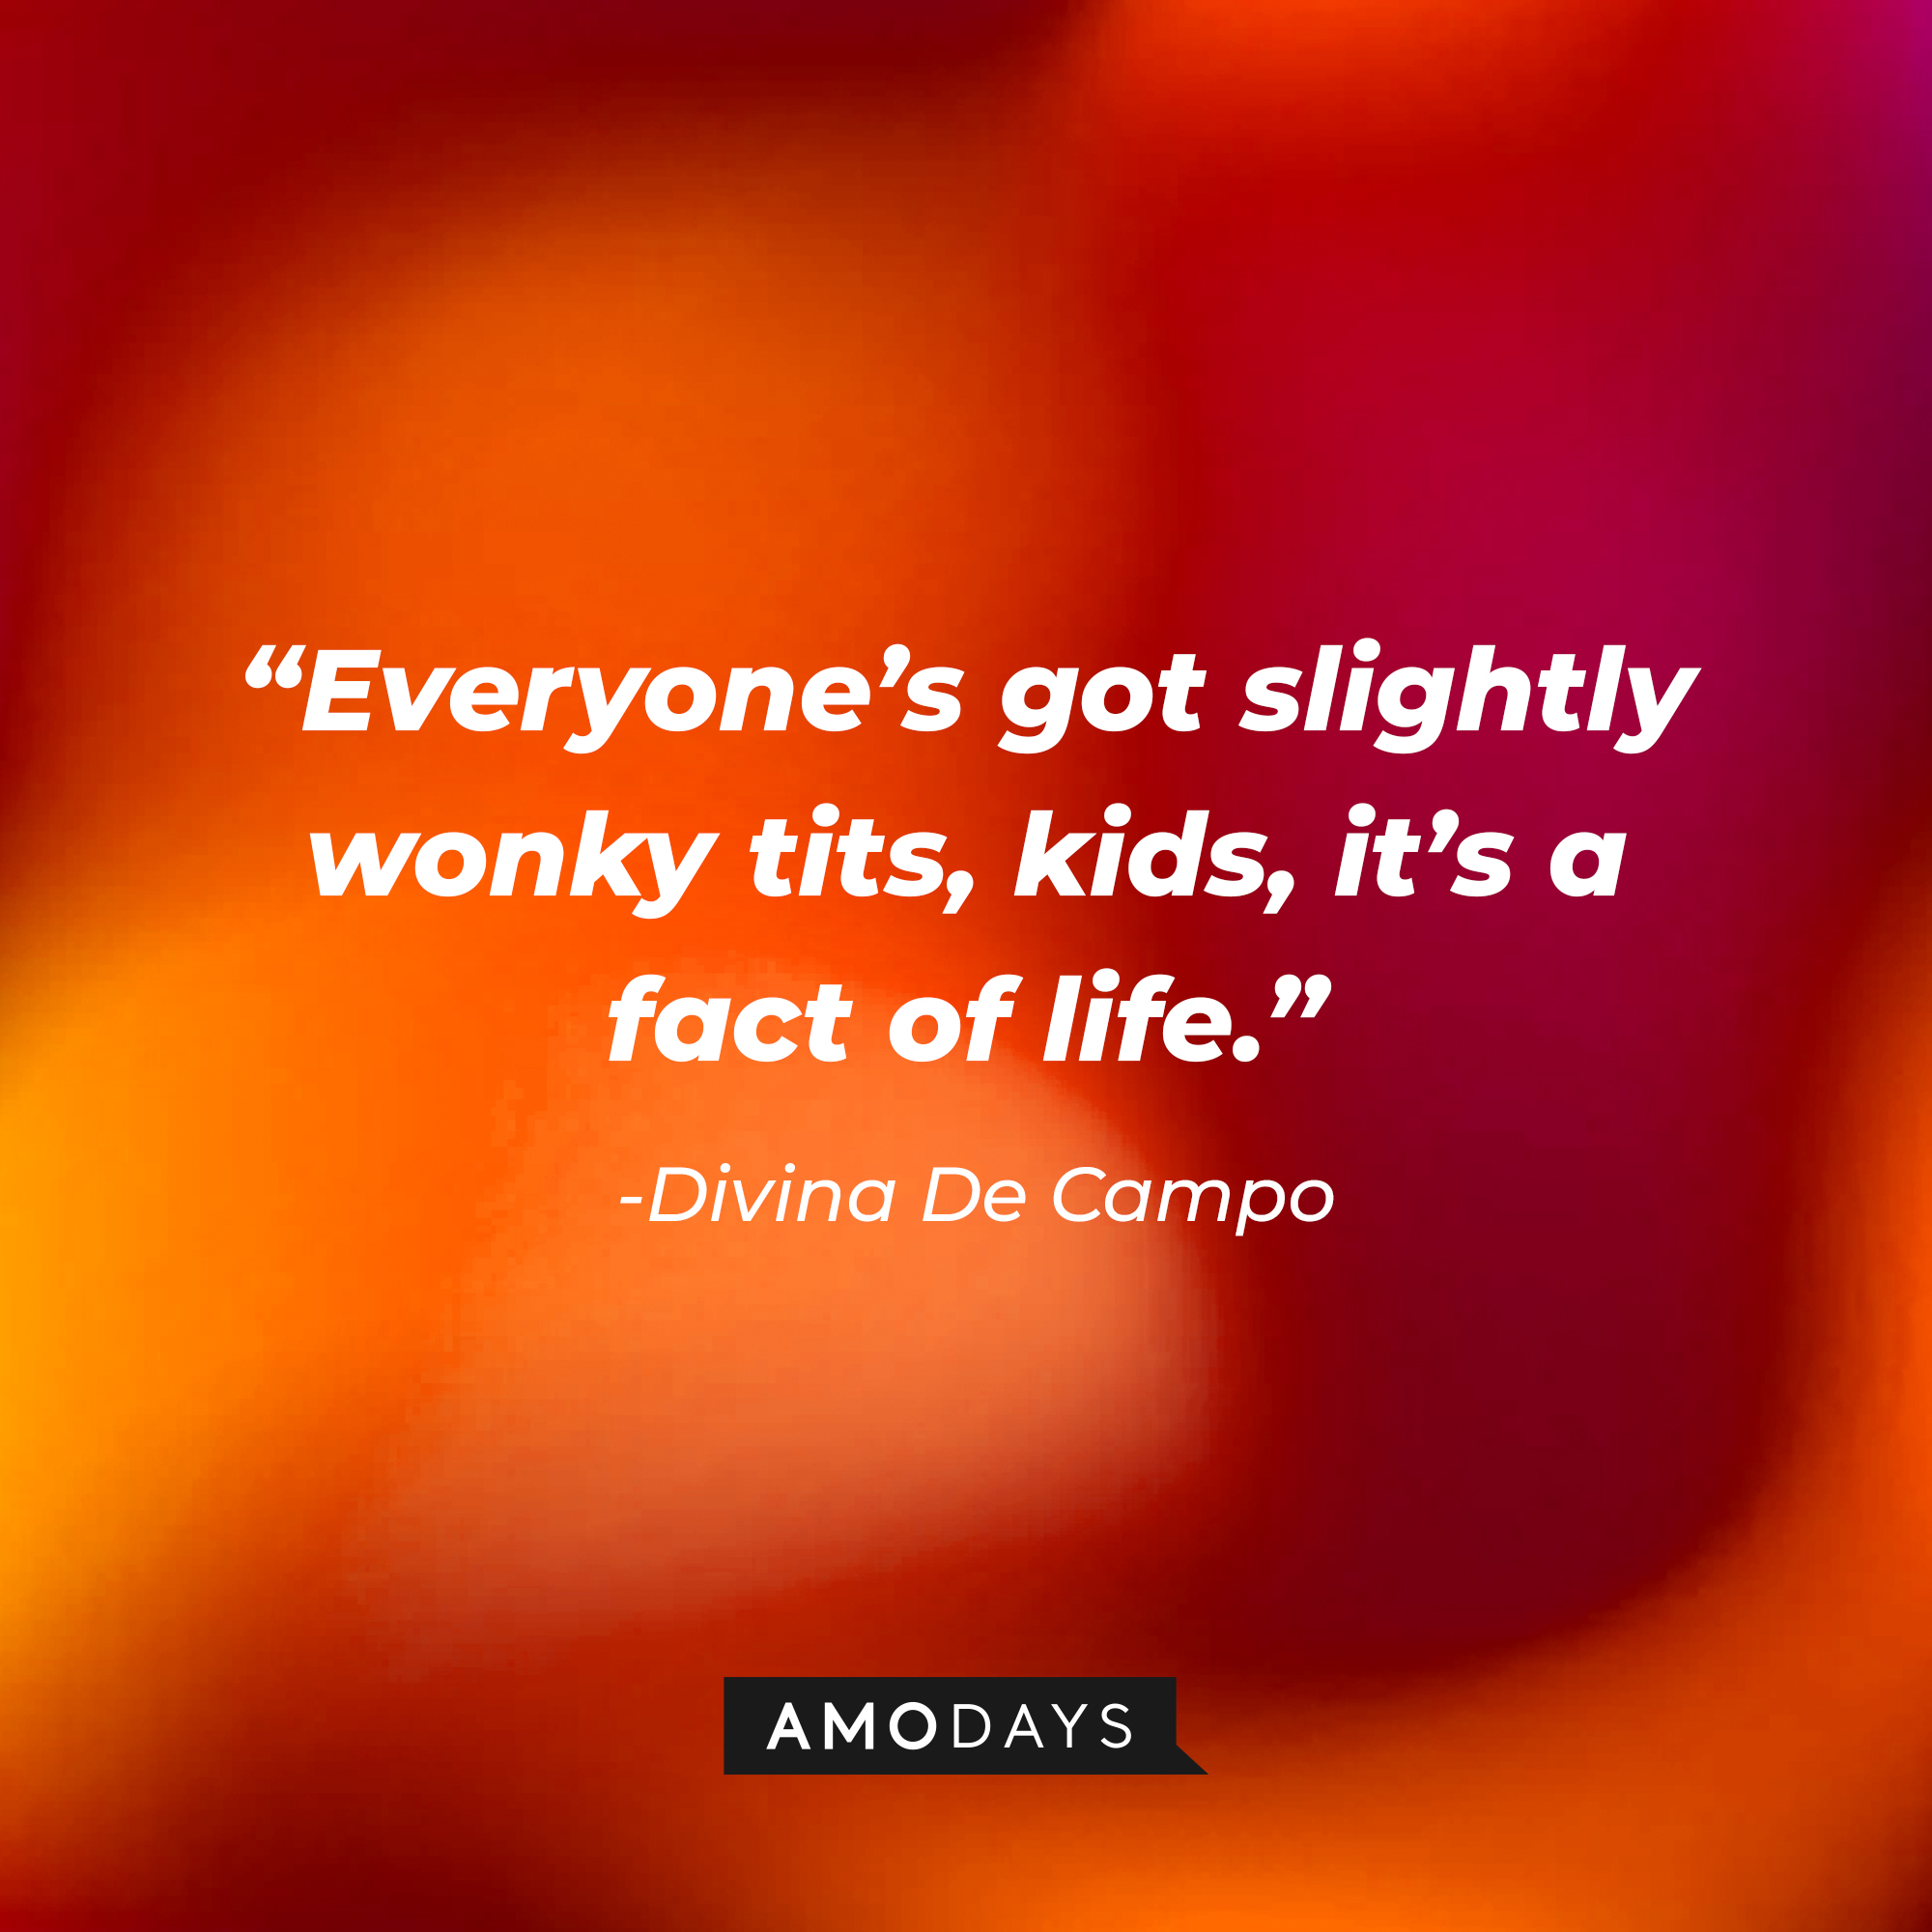 Divina De Campo’s quote: “Everyone’s got slightly wonky tits, kids, it’s a fact of life.” |  Source: AmoDays